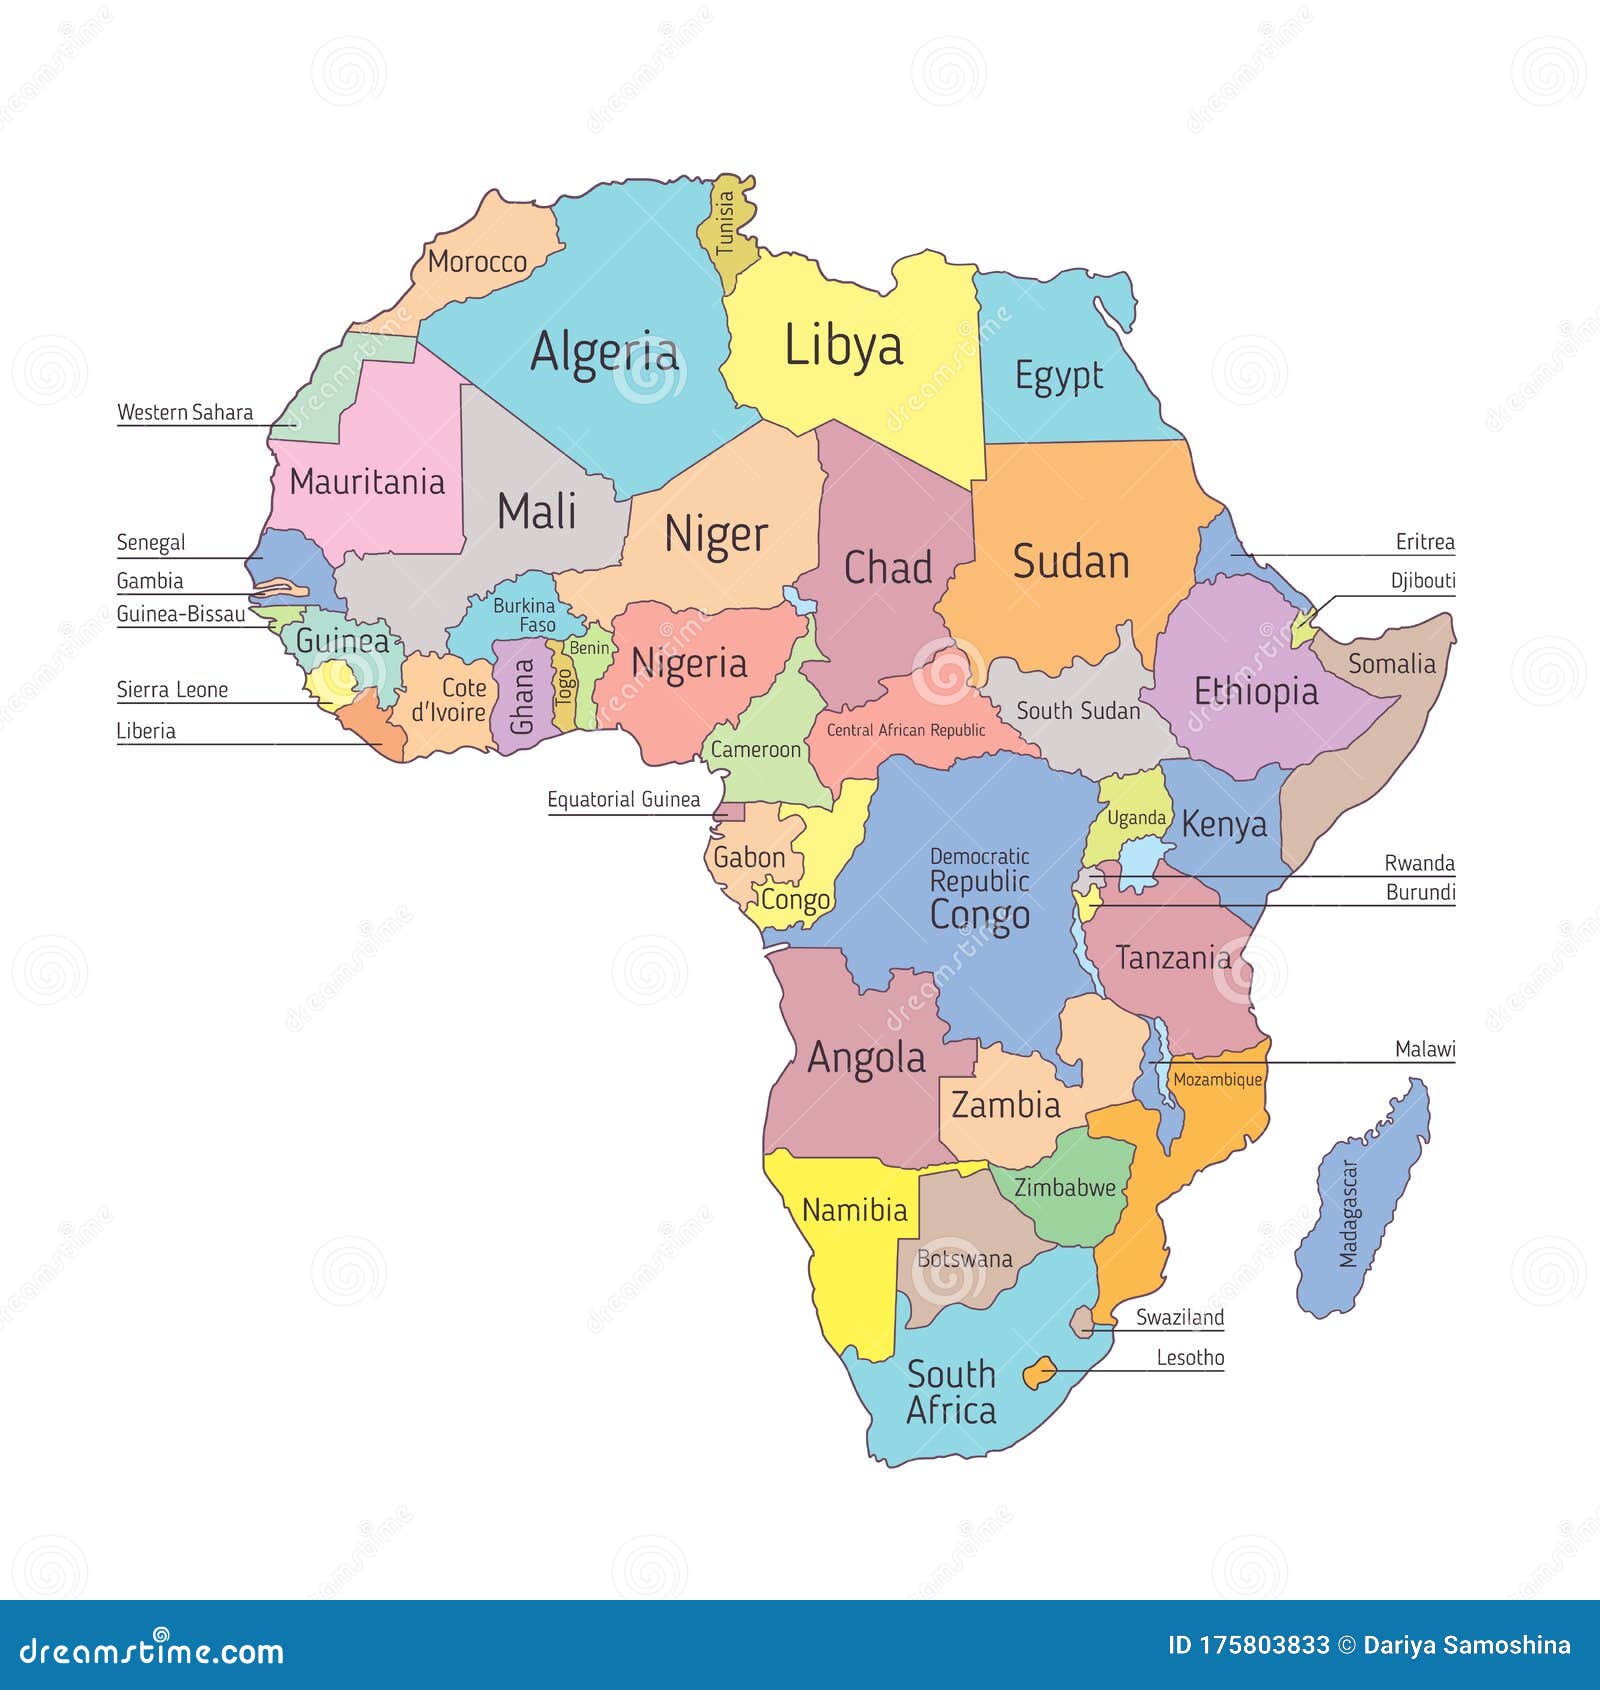 Vector Illustration Map Of Africa With Country Names Stock Vector Illustration Of Borders Border 175803833